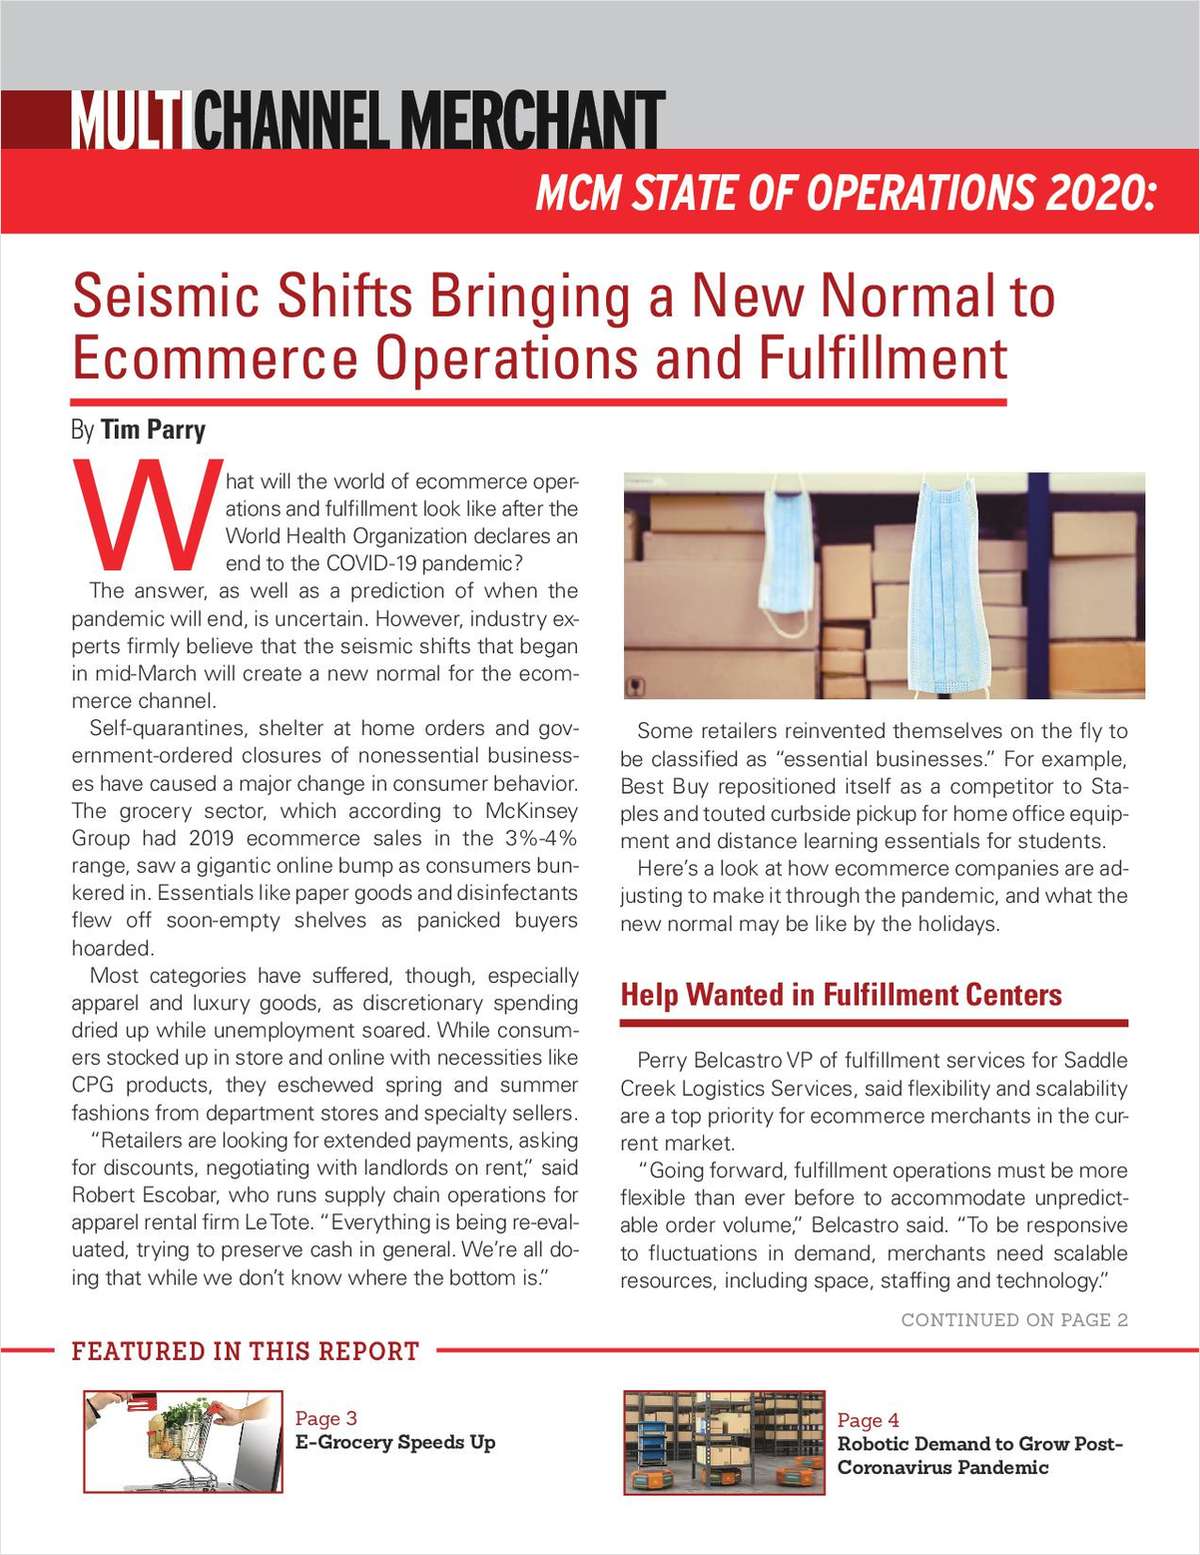 Seismic Shifts Bringing a New Normal to Ecommerce Operations and Fulfillment